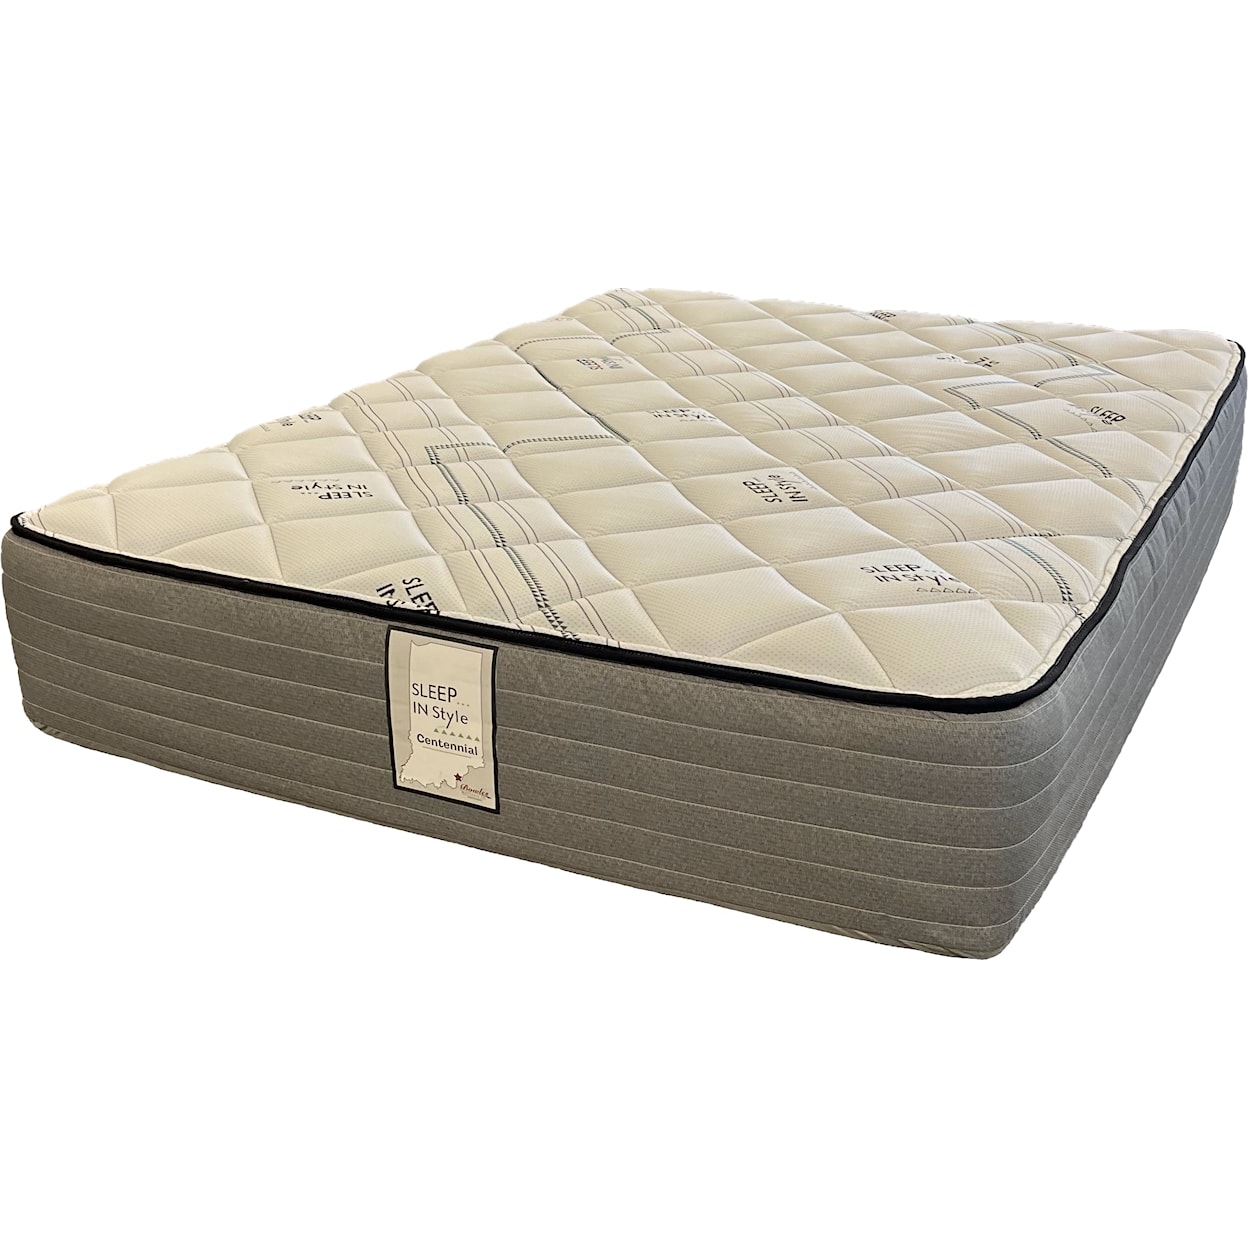 Bowles Mattress Co. Sleep IN Style Heritage Cal. King Mattress